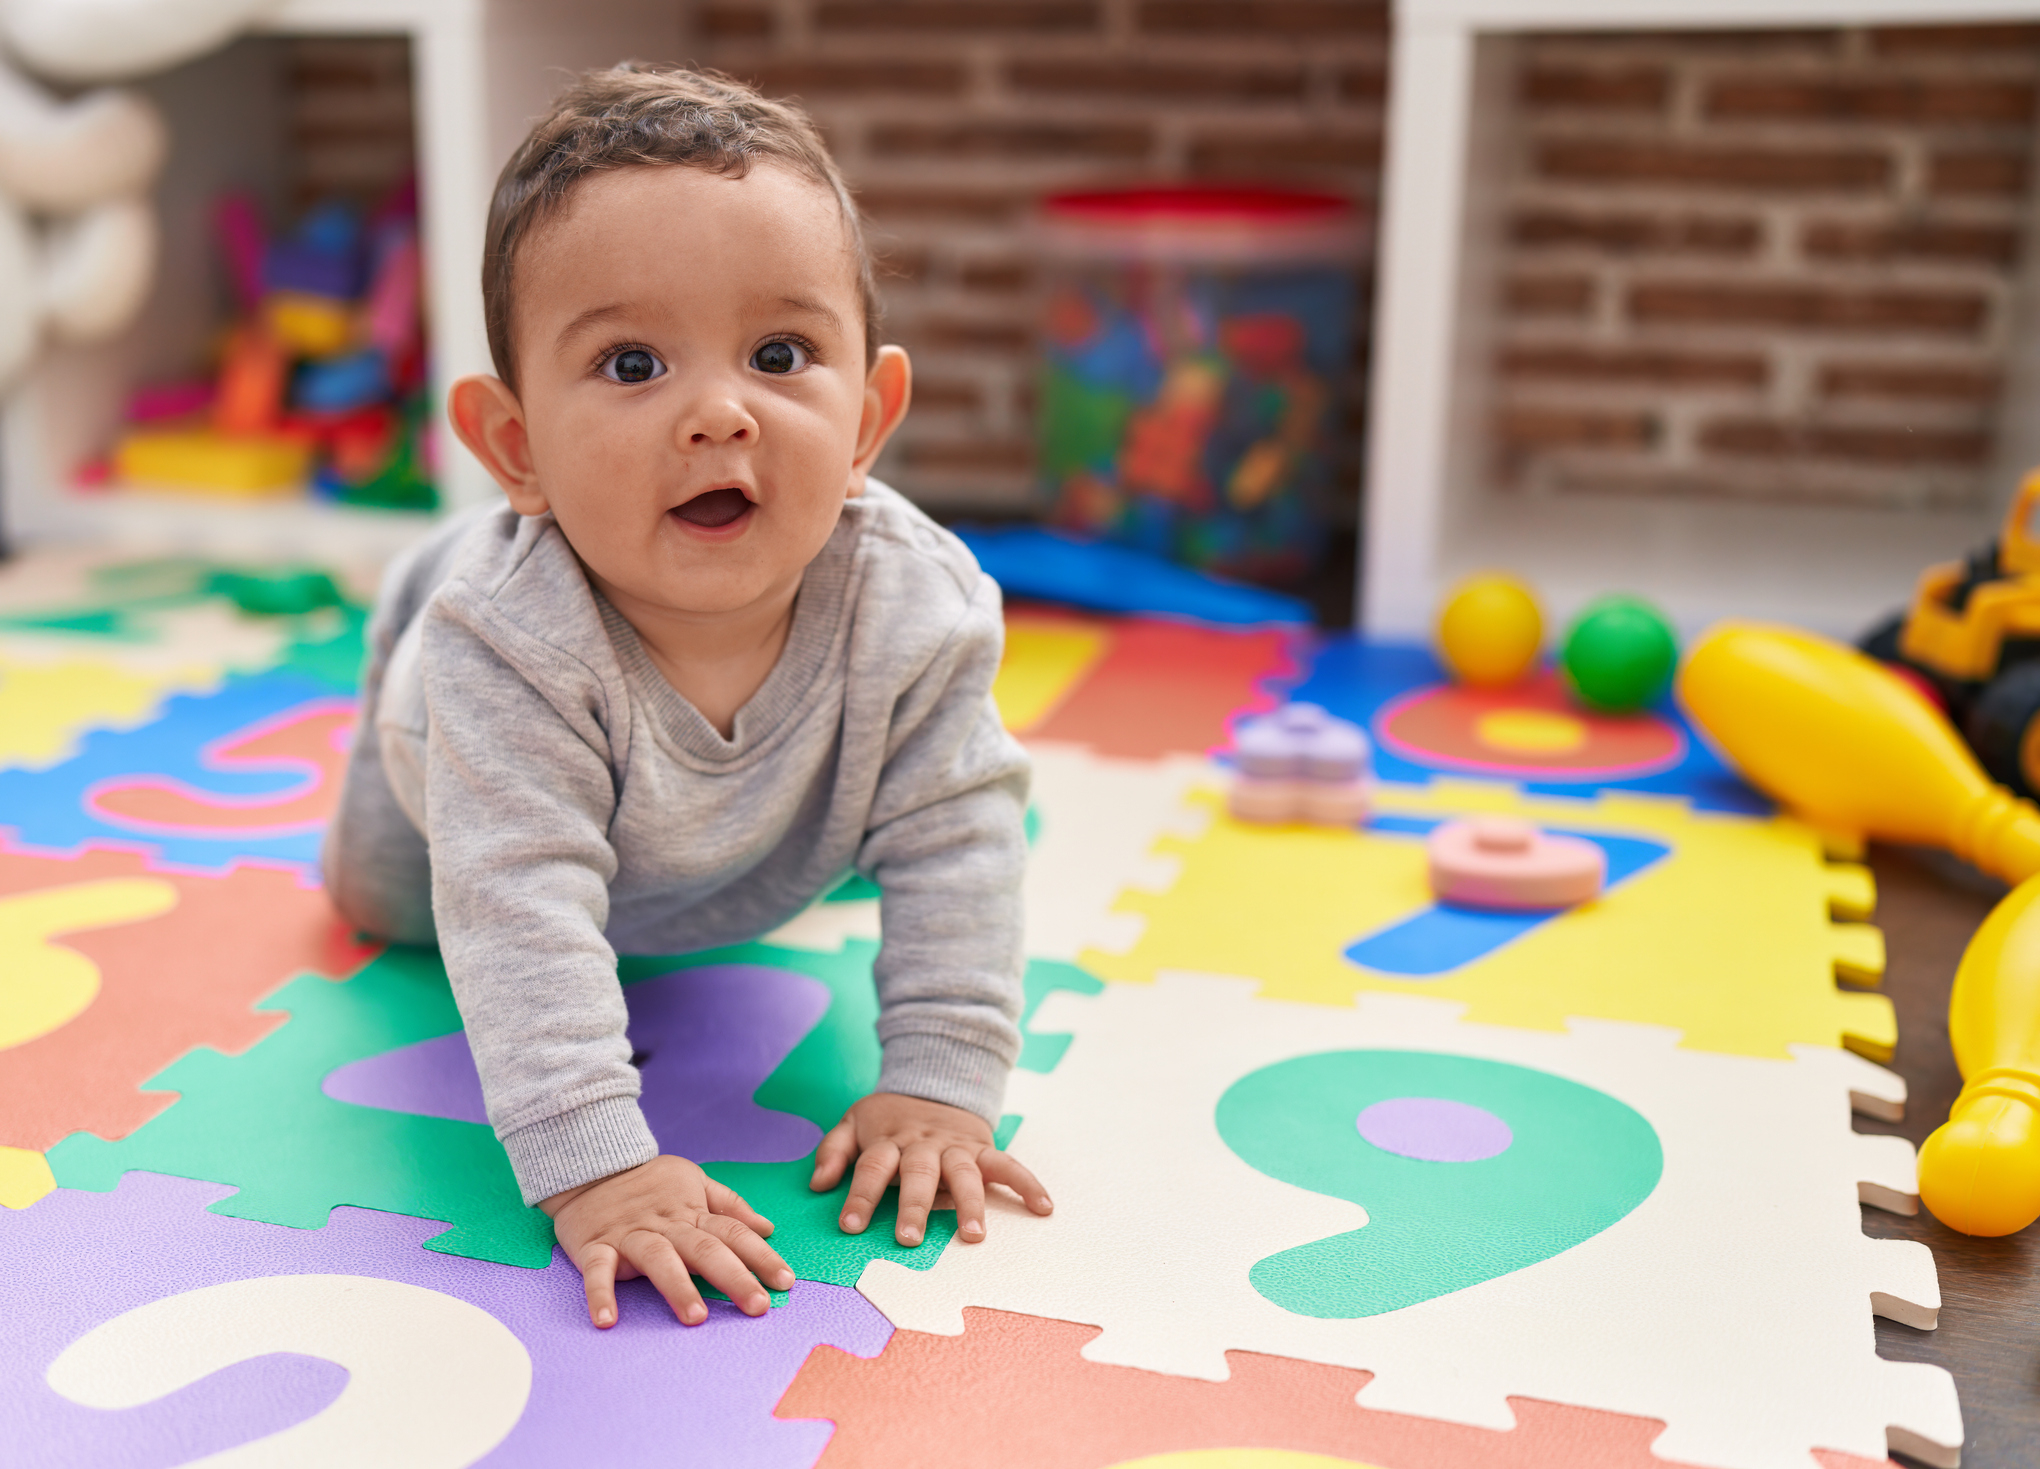 Baby crawling on an alphabet floor puzzle in a playroom